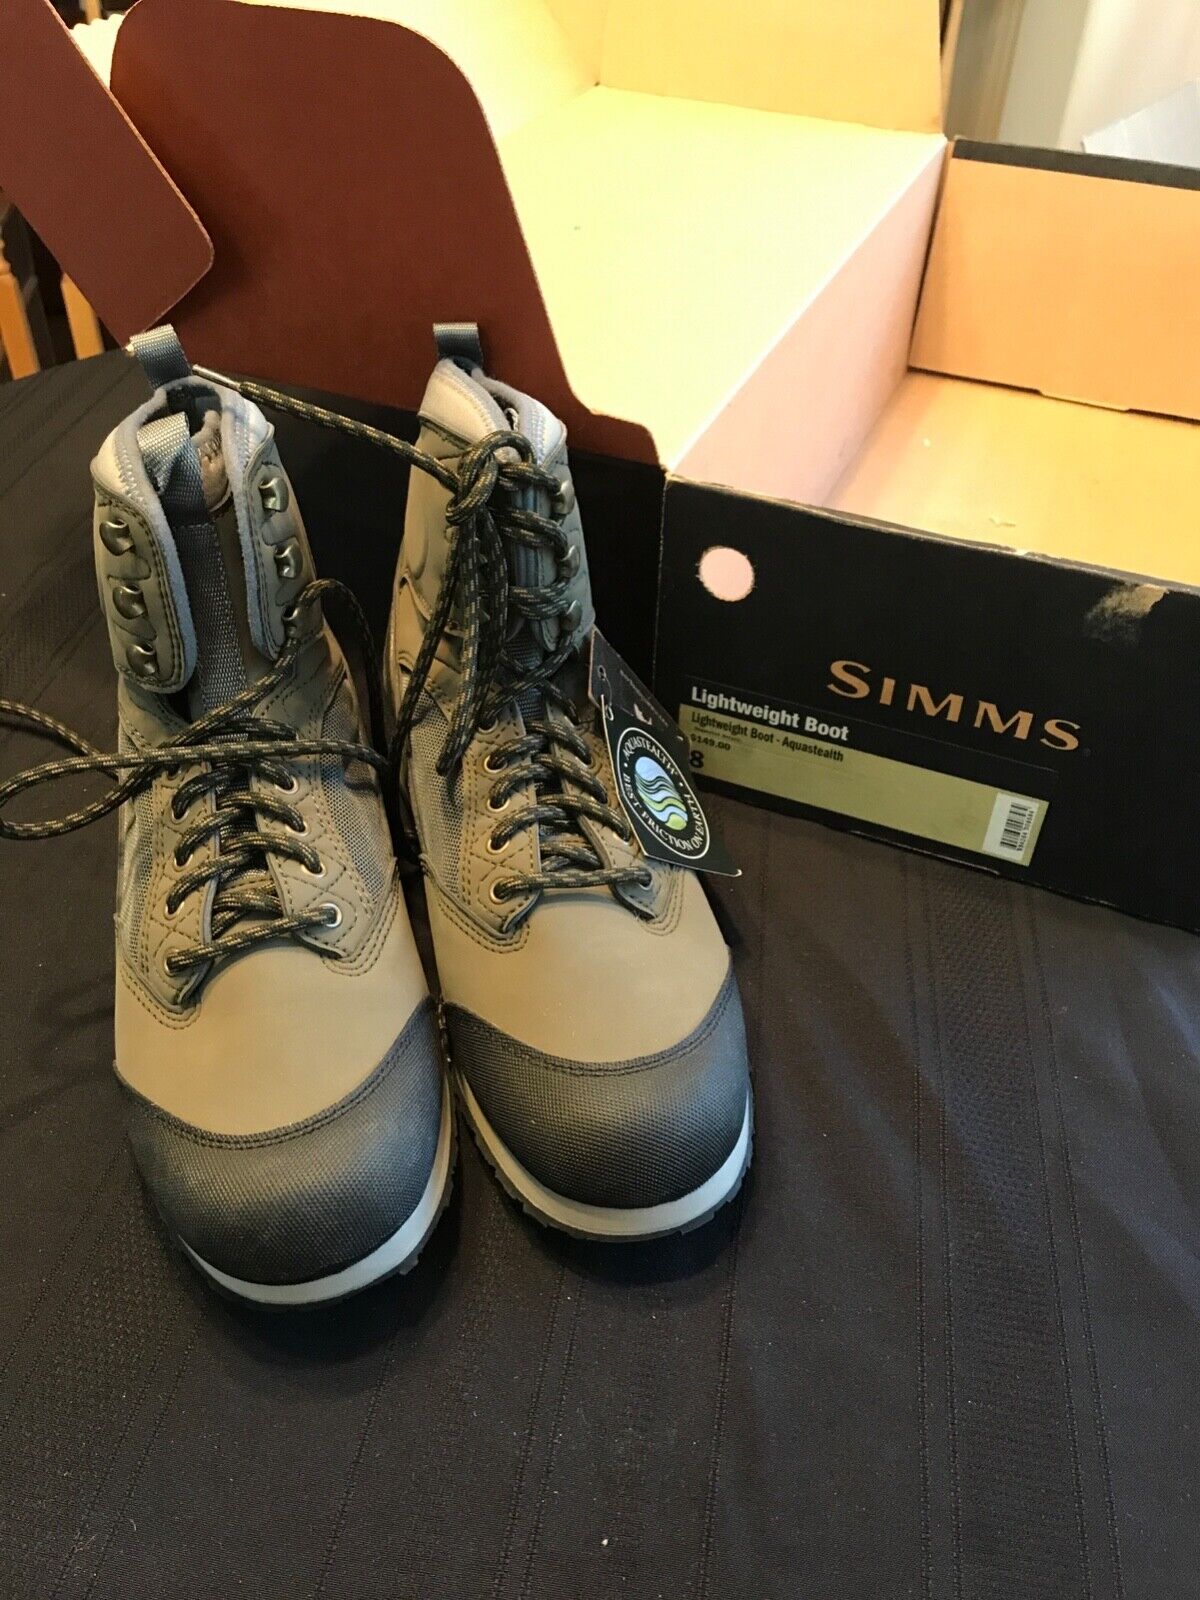 SIMMS lightweight wading boot size 8 with store Aquastealth Free shipping new box